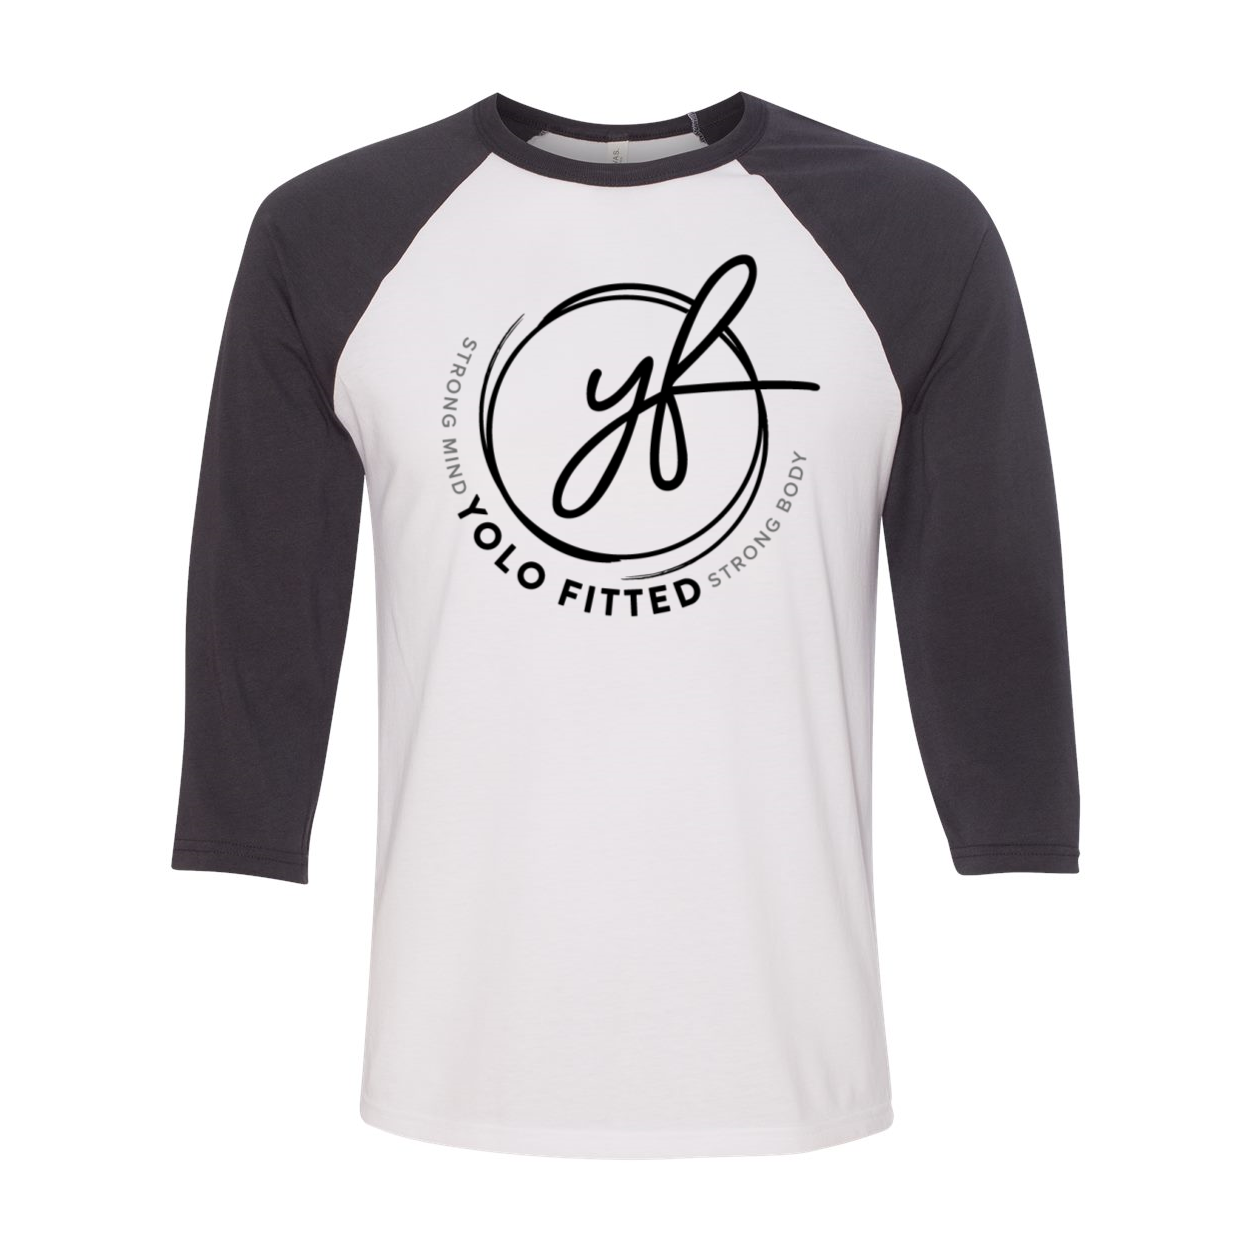 YOLO FITTED TWO-TONED 3/4 SLEEVE SIGNATURE TEE - Yolofitted